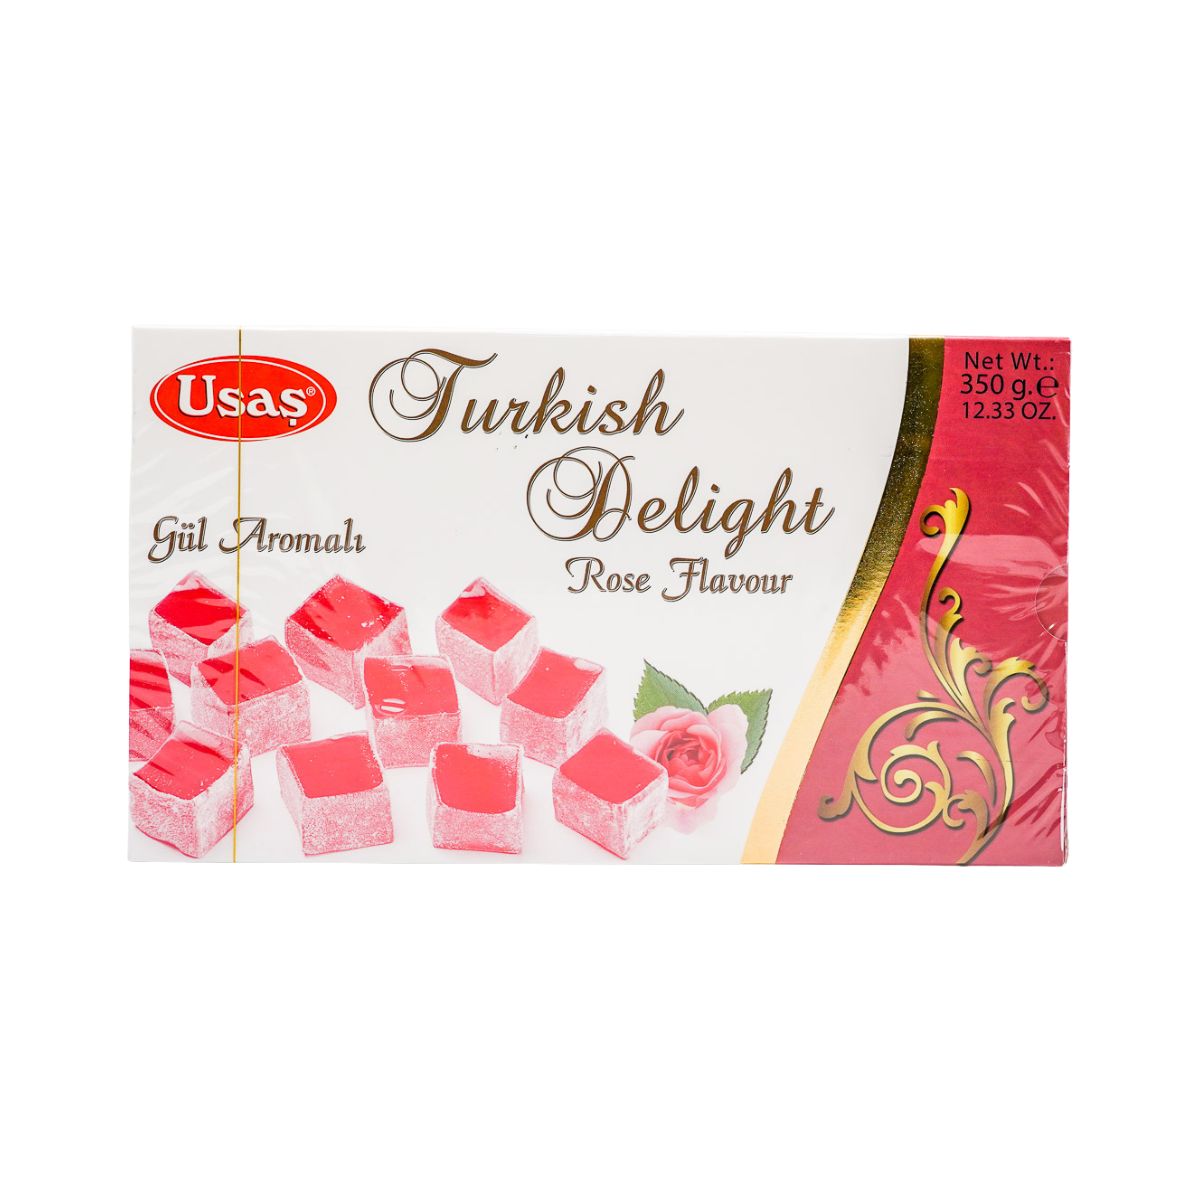 Turkish Delight with Rose Flavour